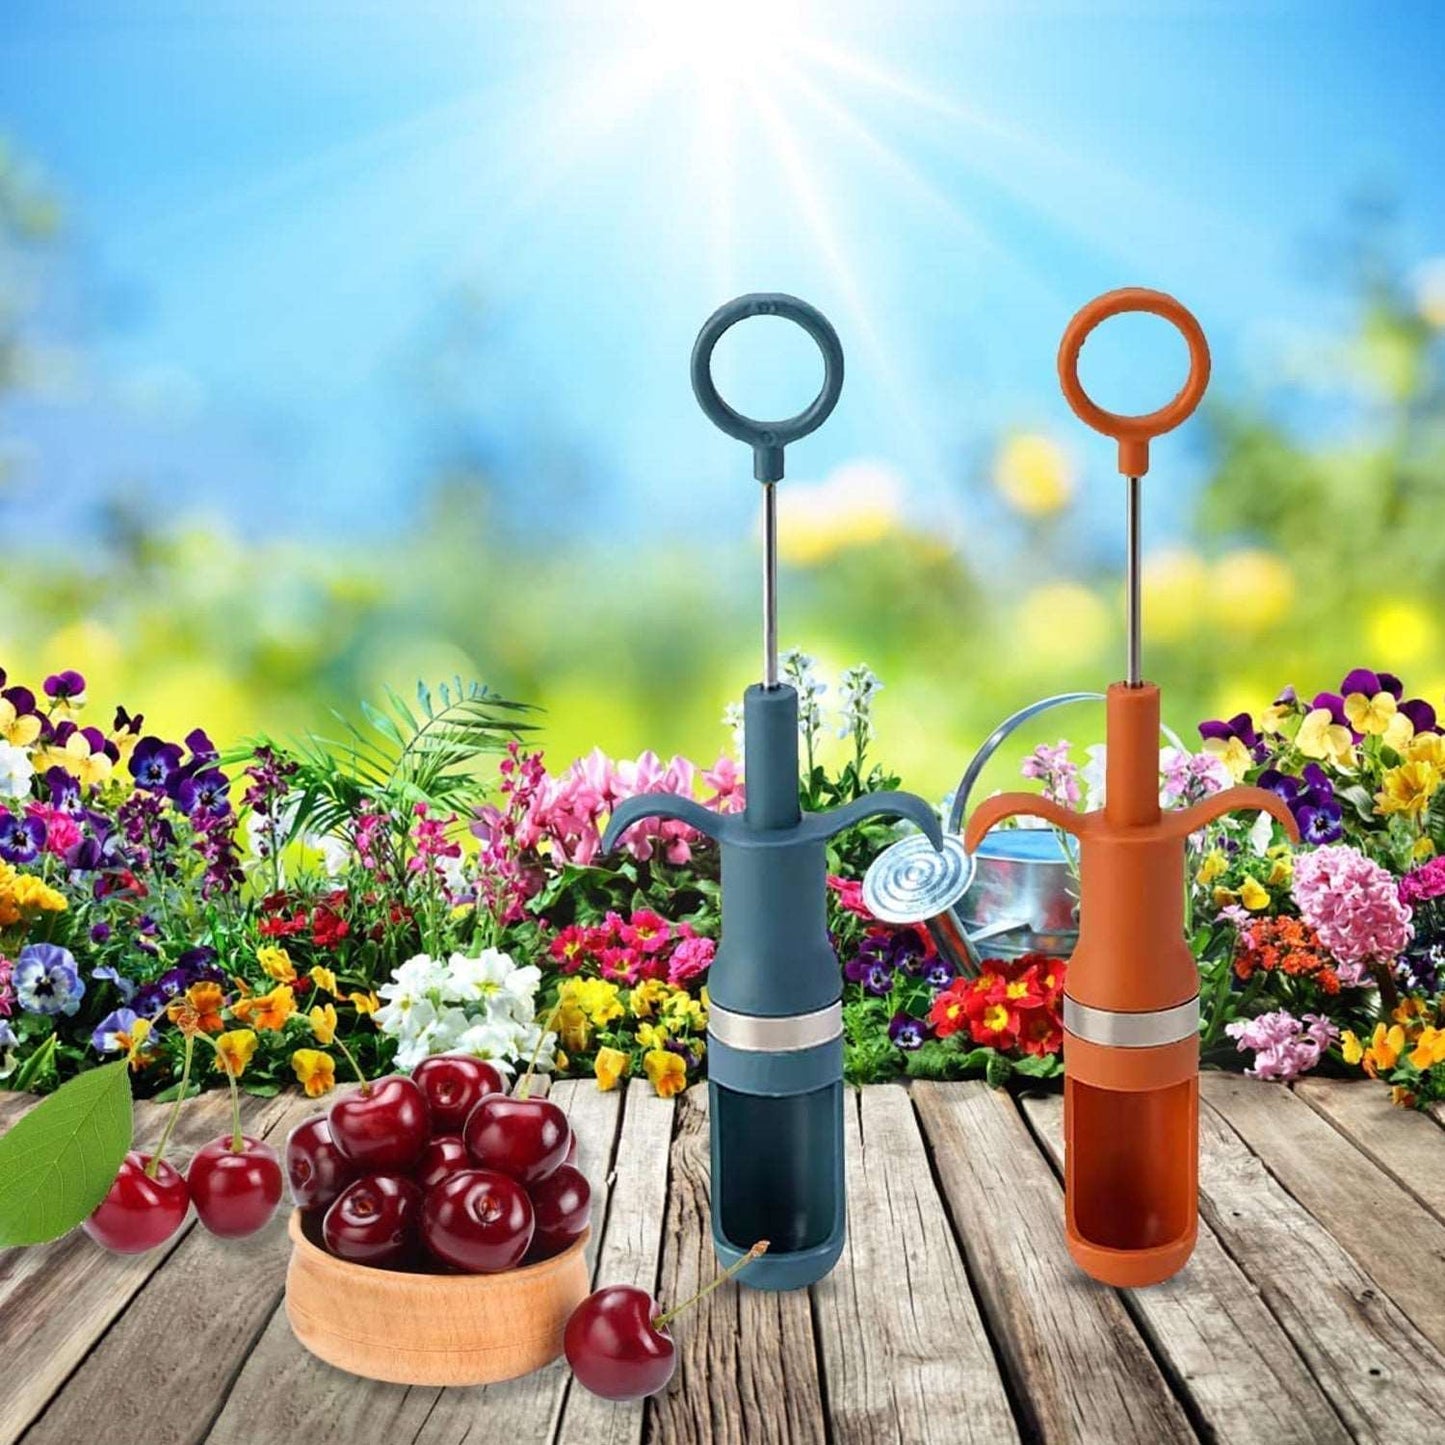 Cherry Pitter Tool, One Hand Operation Cherry Corer Pitter Remover Tool Best, Cherry Pit Kitchen Tools for Cherries Jam Quick Removal Fruit Stones (1pc)